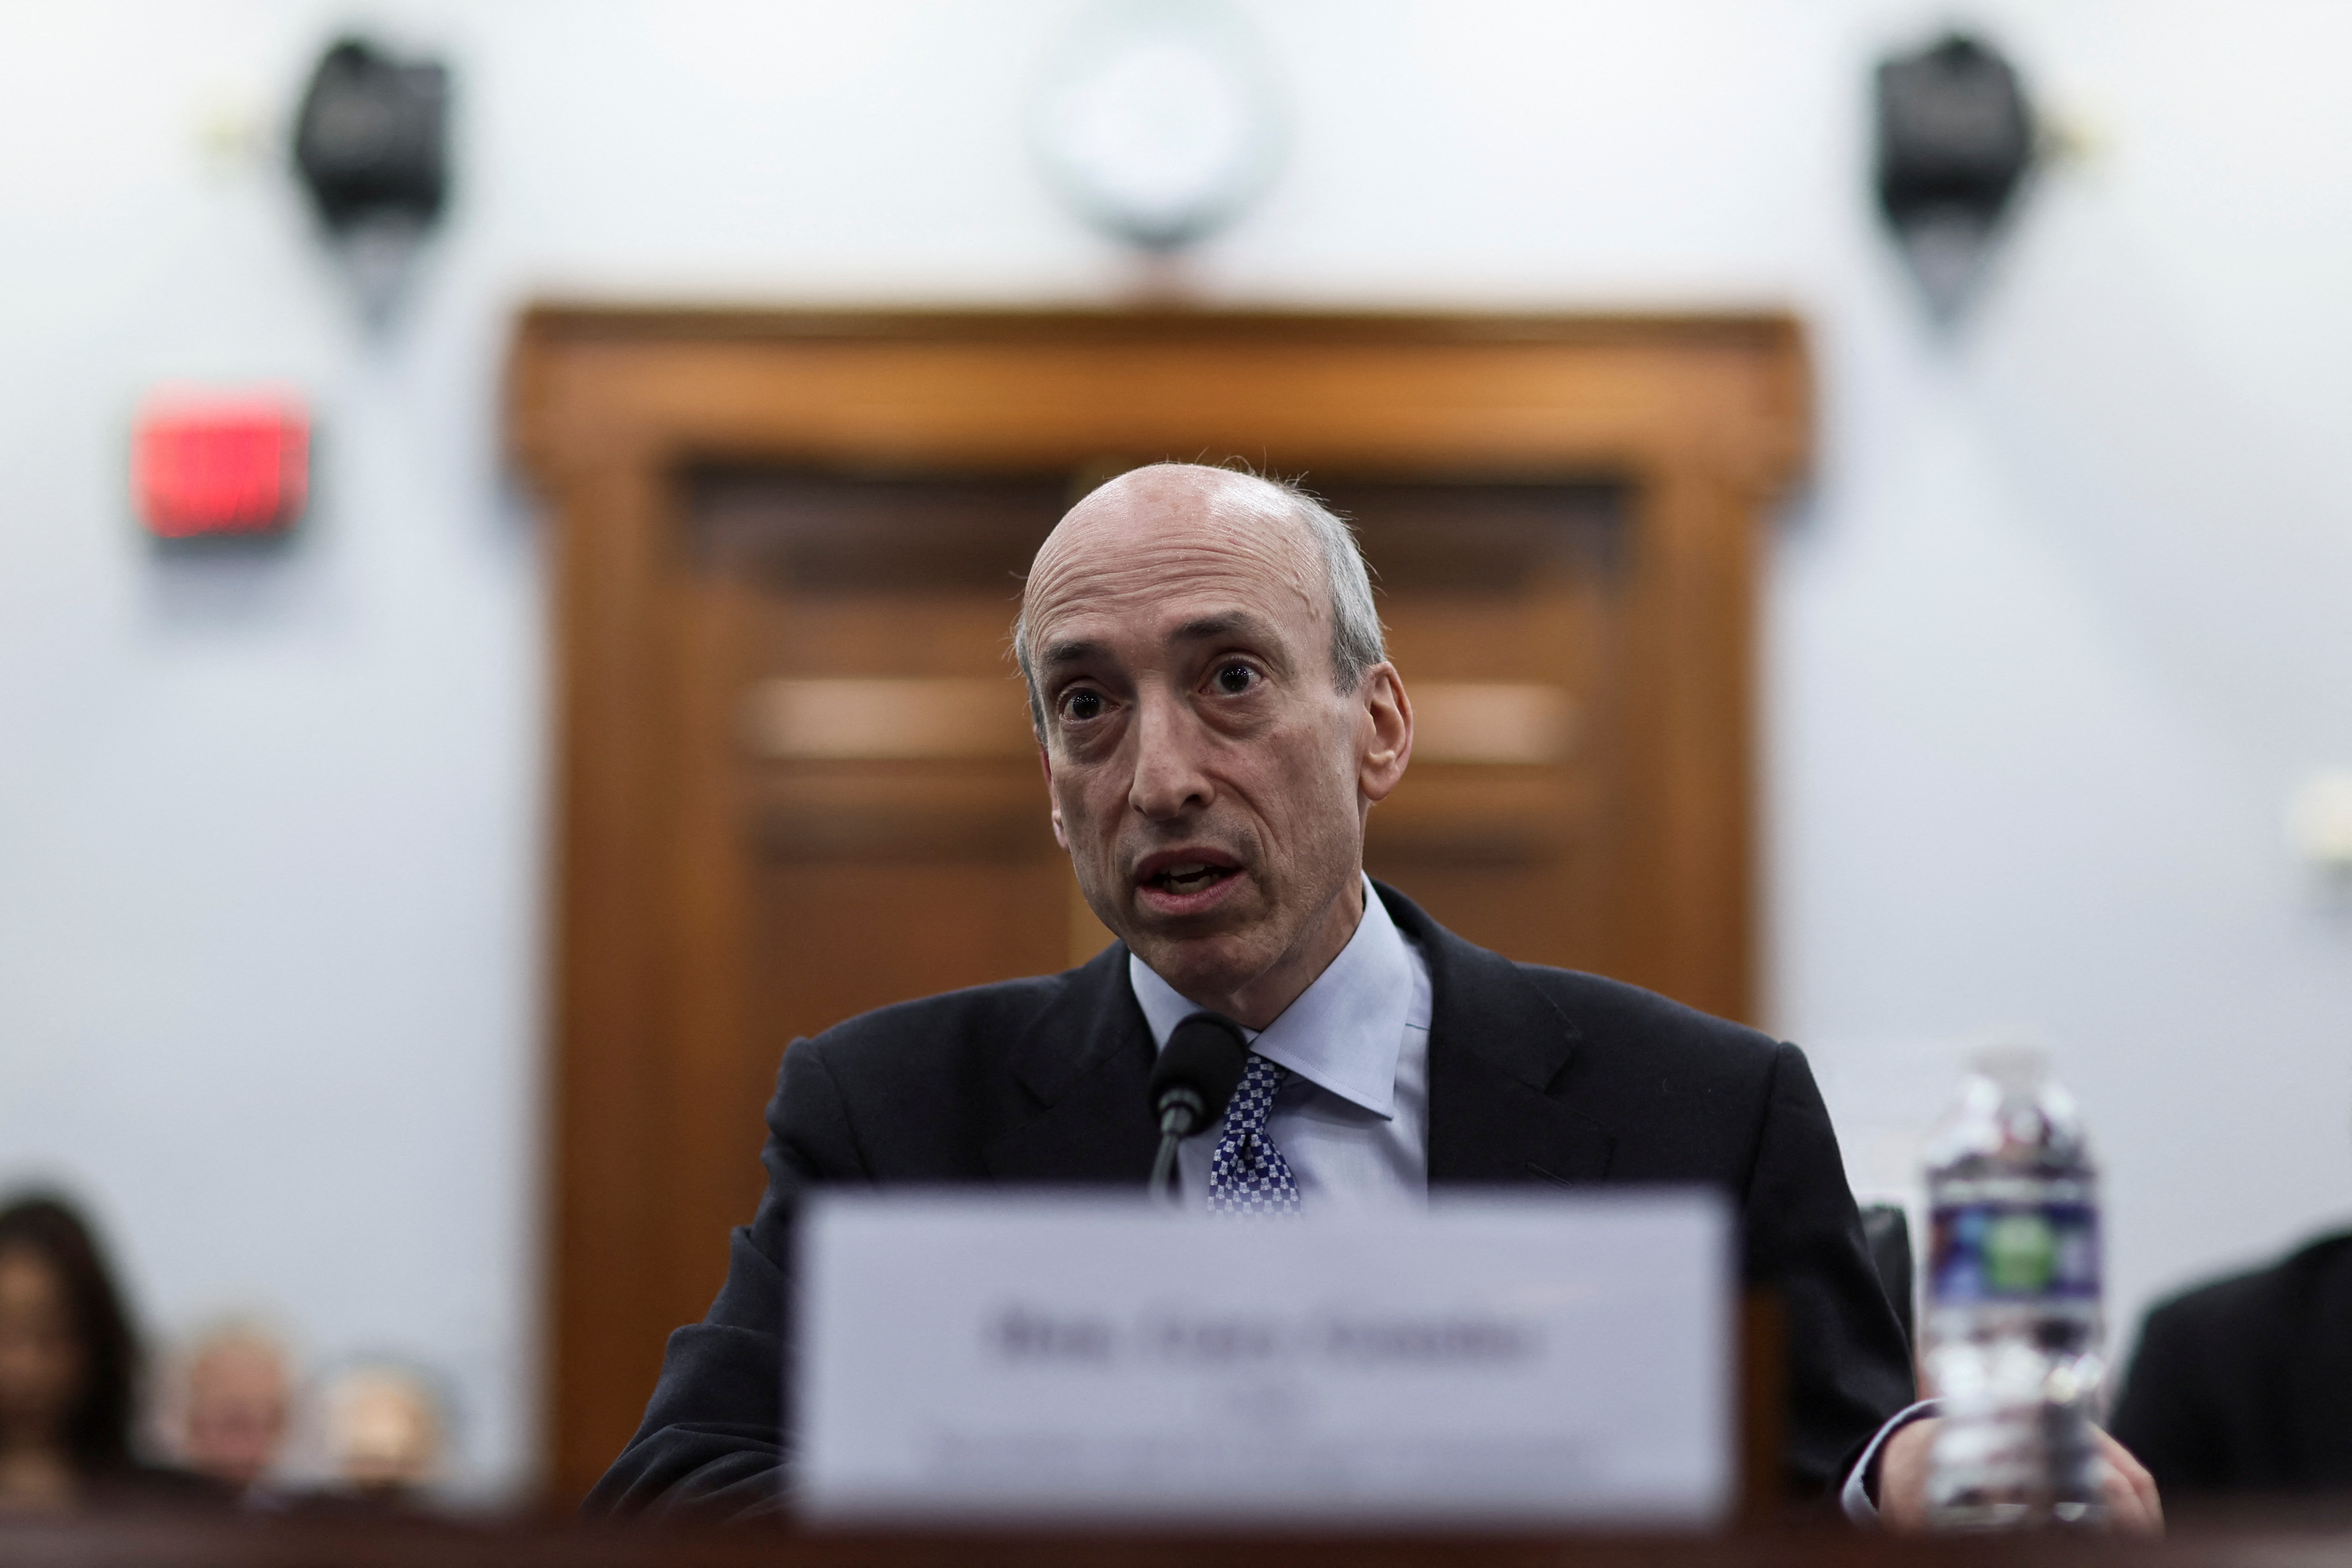 SEC Chairman Gary Gensler testifies on budget before a House Financial Services and General Government Subcommittee hearing on Capitol Hill in W